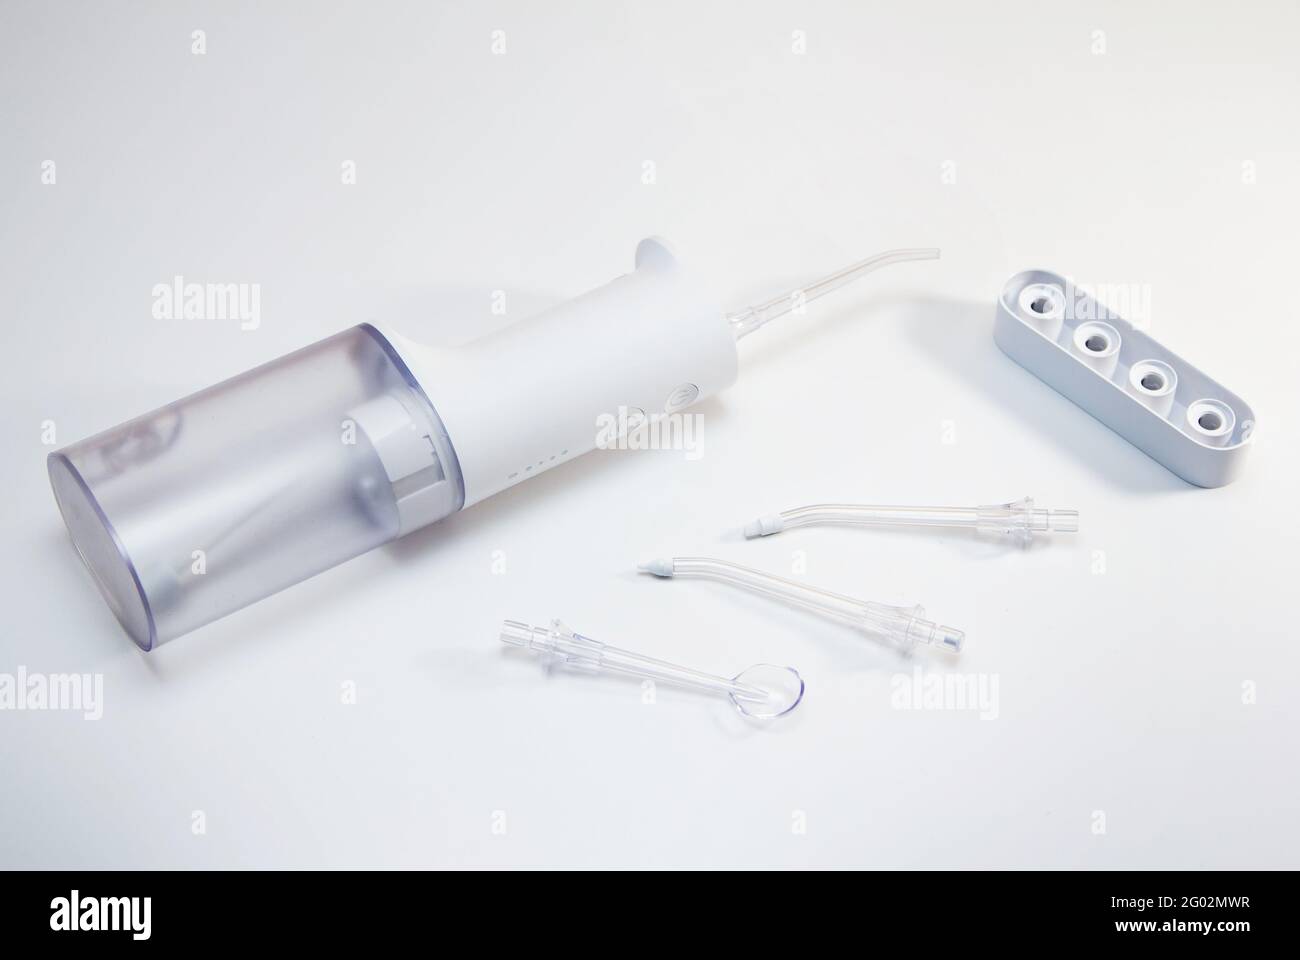 Electric dental irrigator with different nozzles – tools for teeth hygiene. Stock Photo